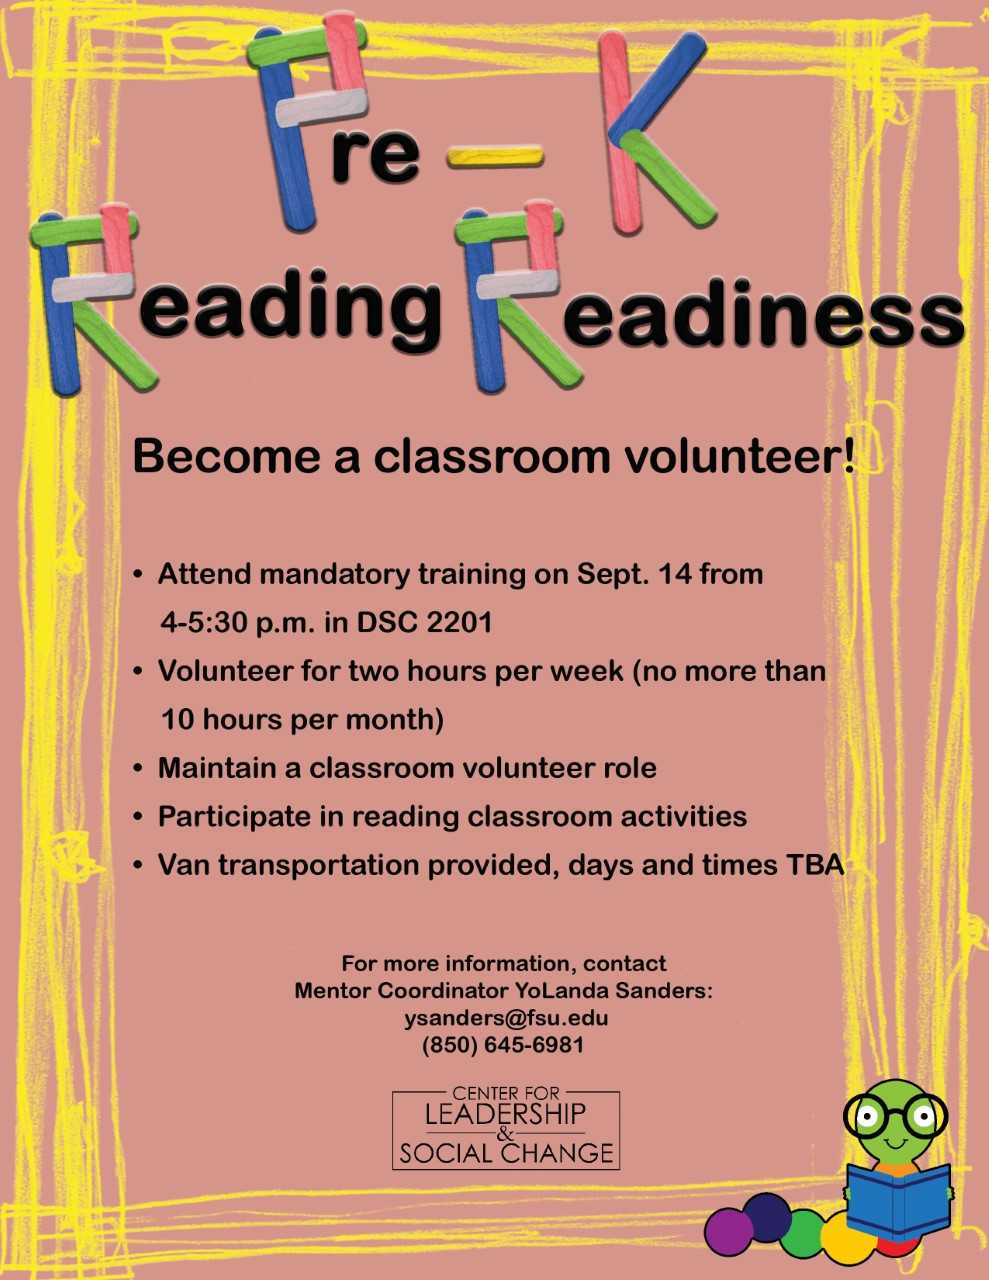 Pre-K Reading Readiness: Become a classroom volunteer!